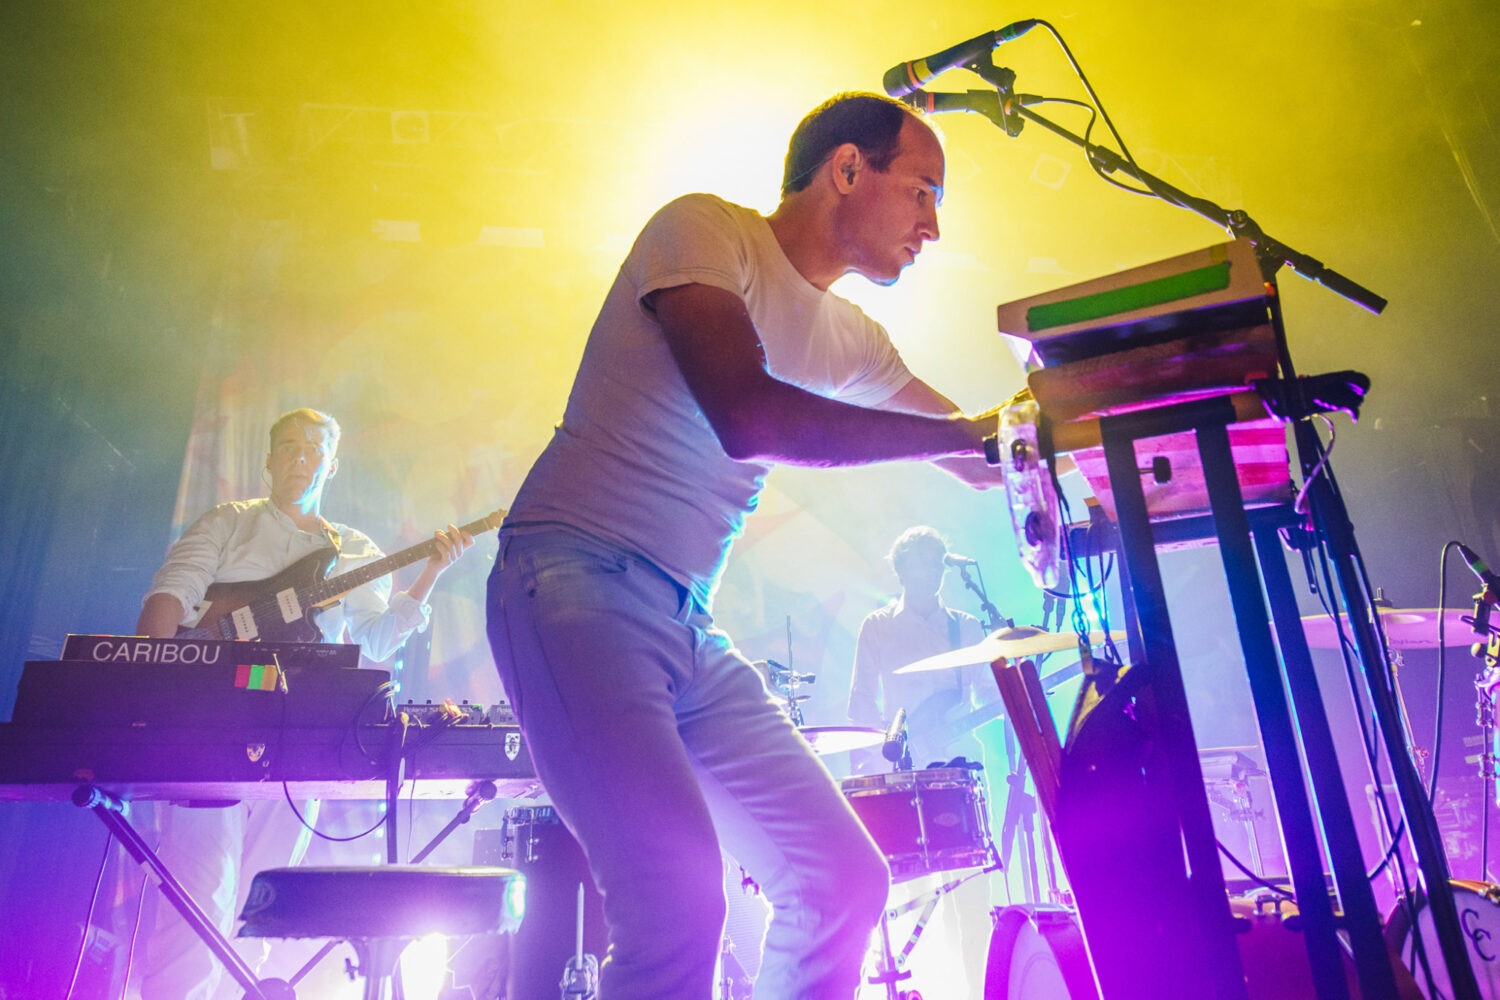 Caribou shares unreleased music in new 6 Music mix